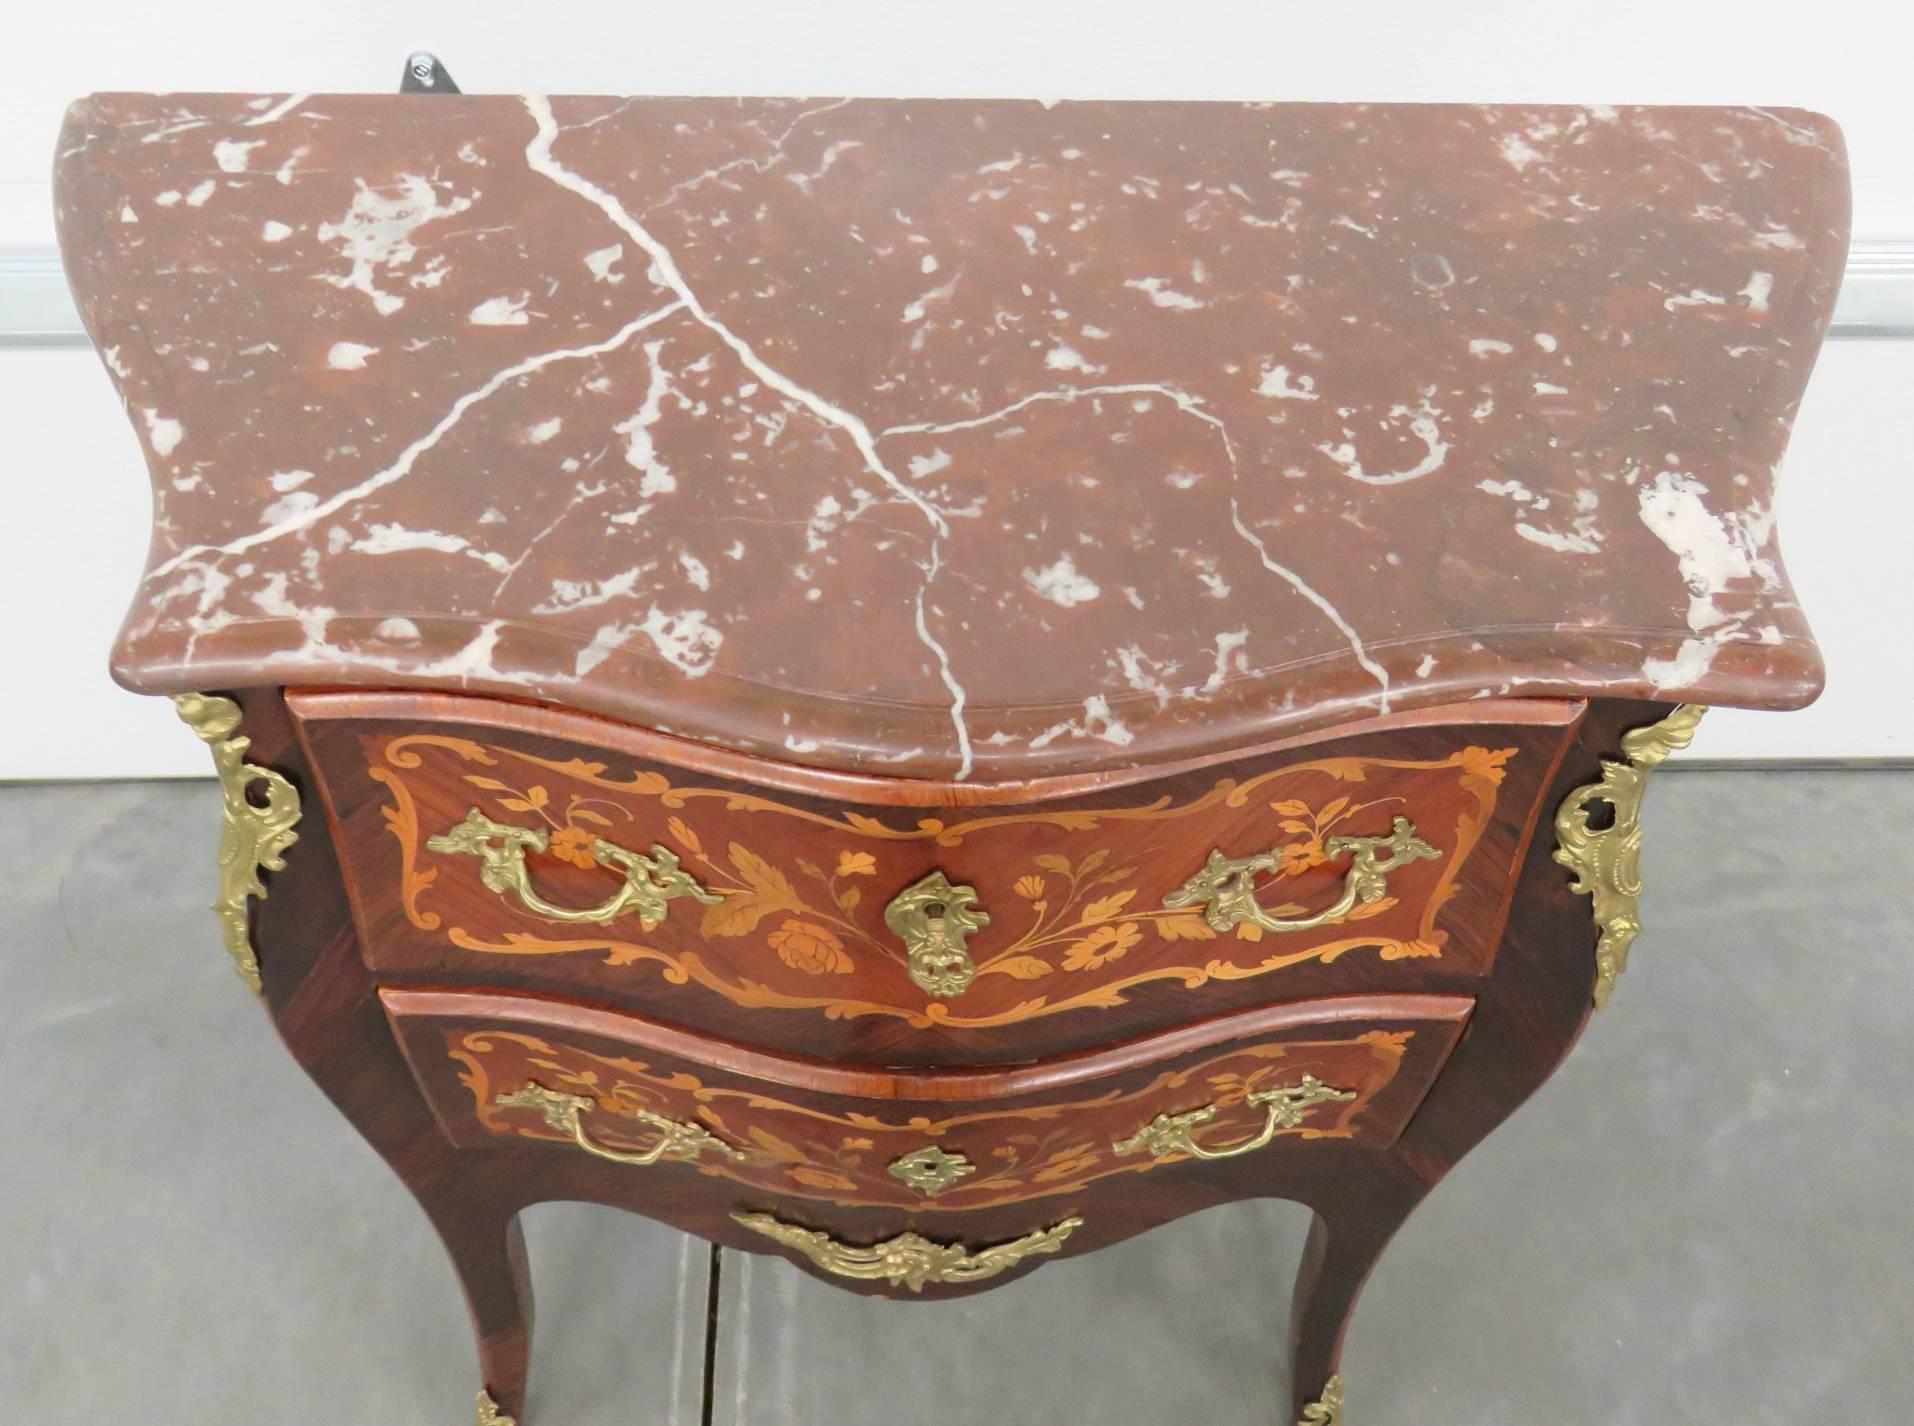 20th Century Louis XVI Style Inlaid Marble-Top Bombe Commode